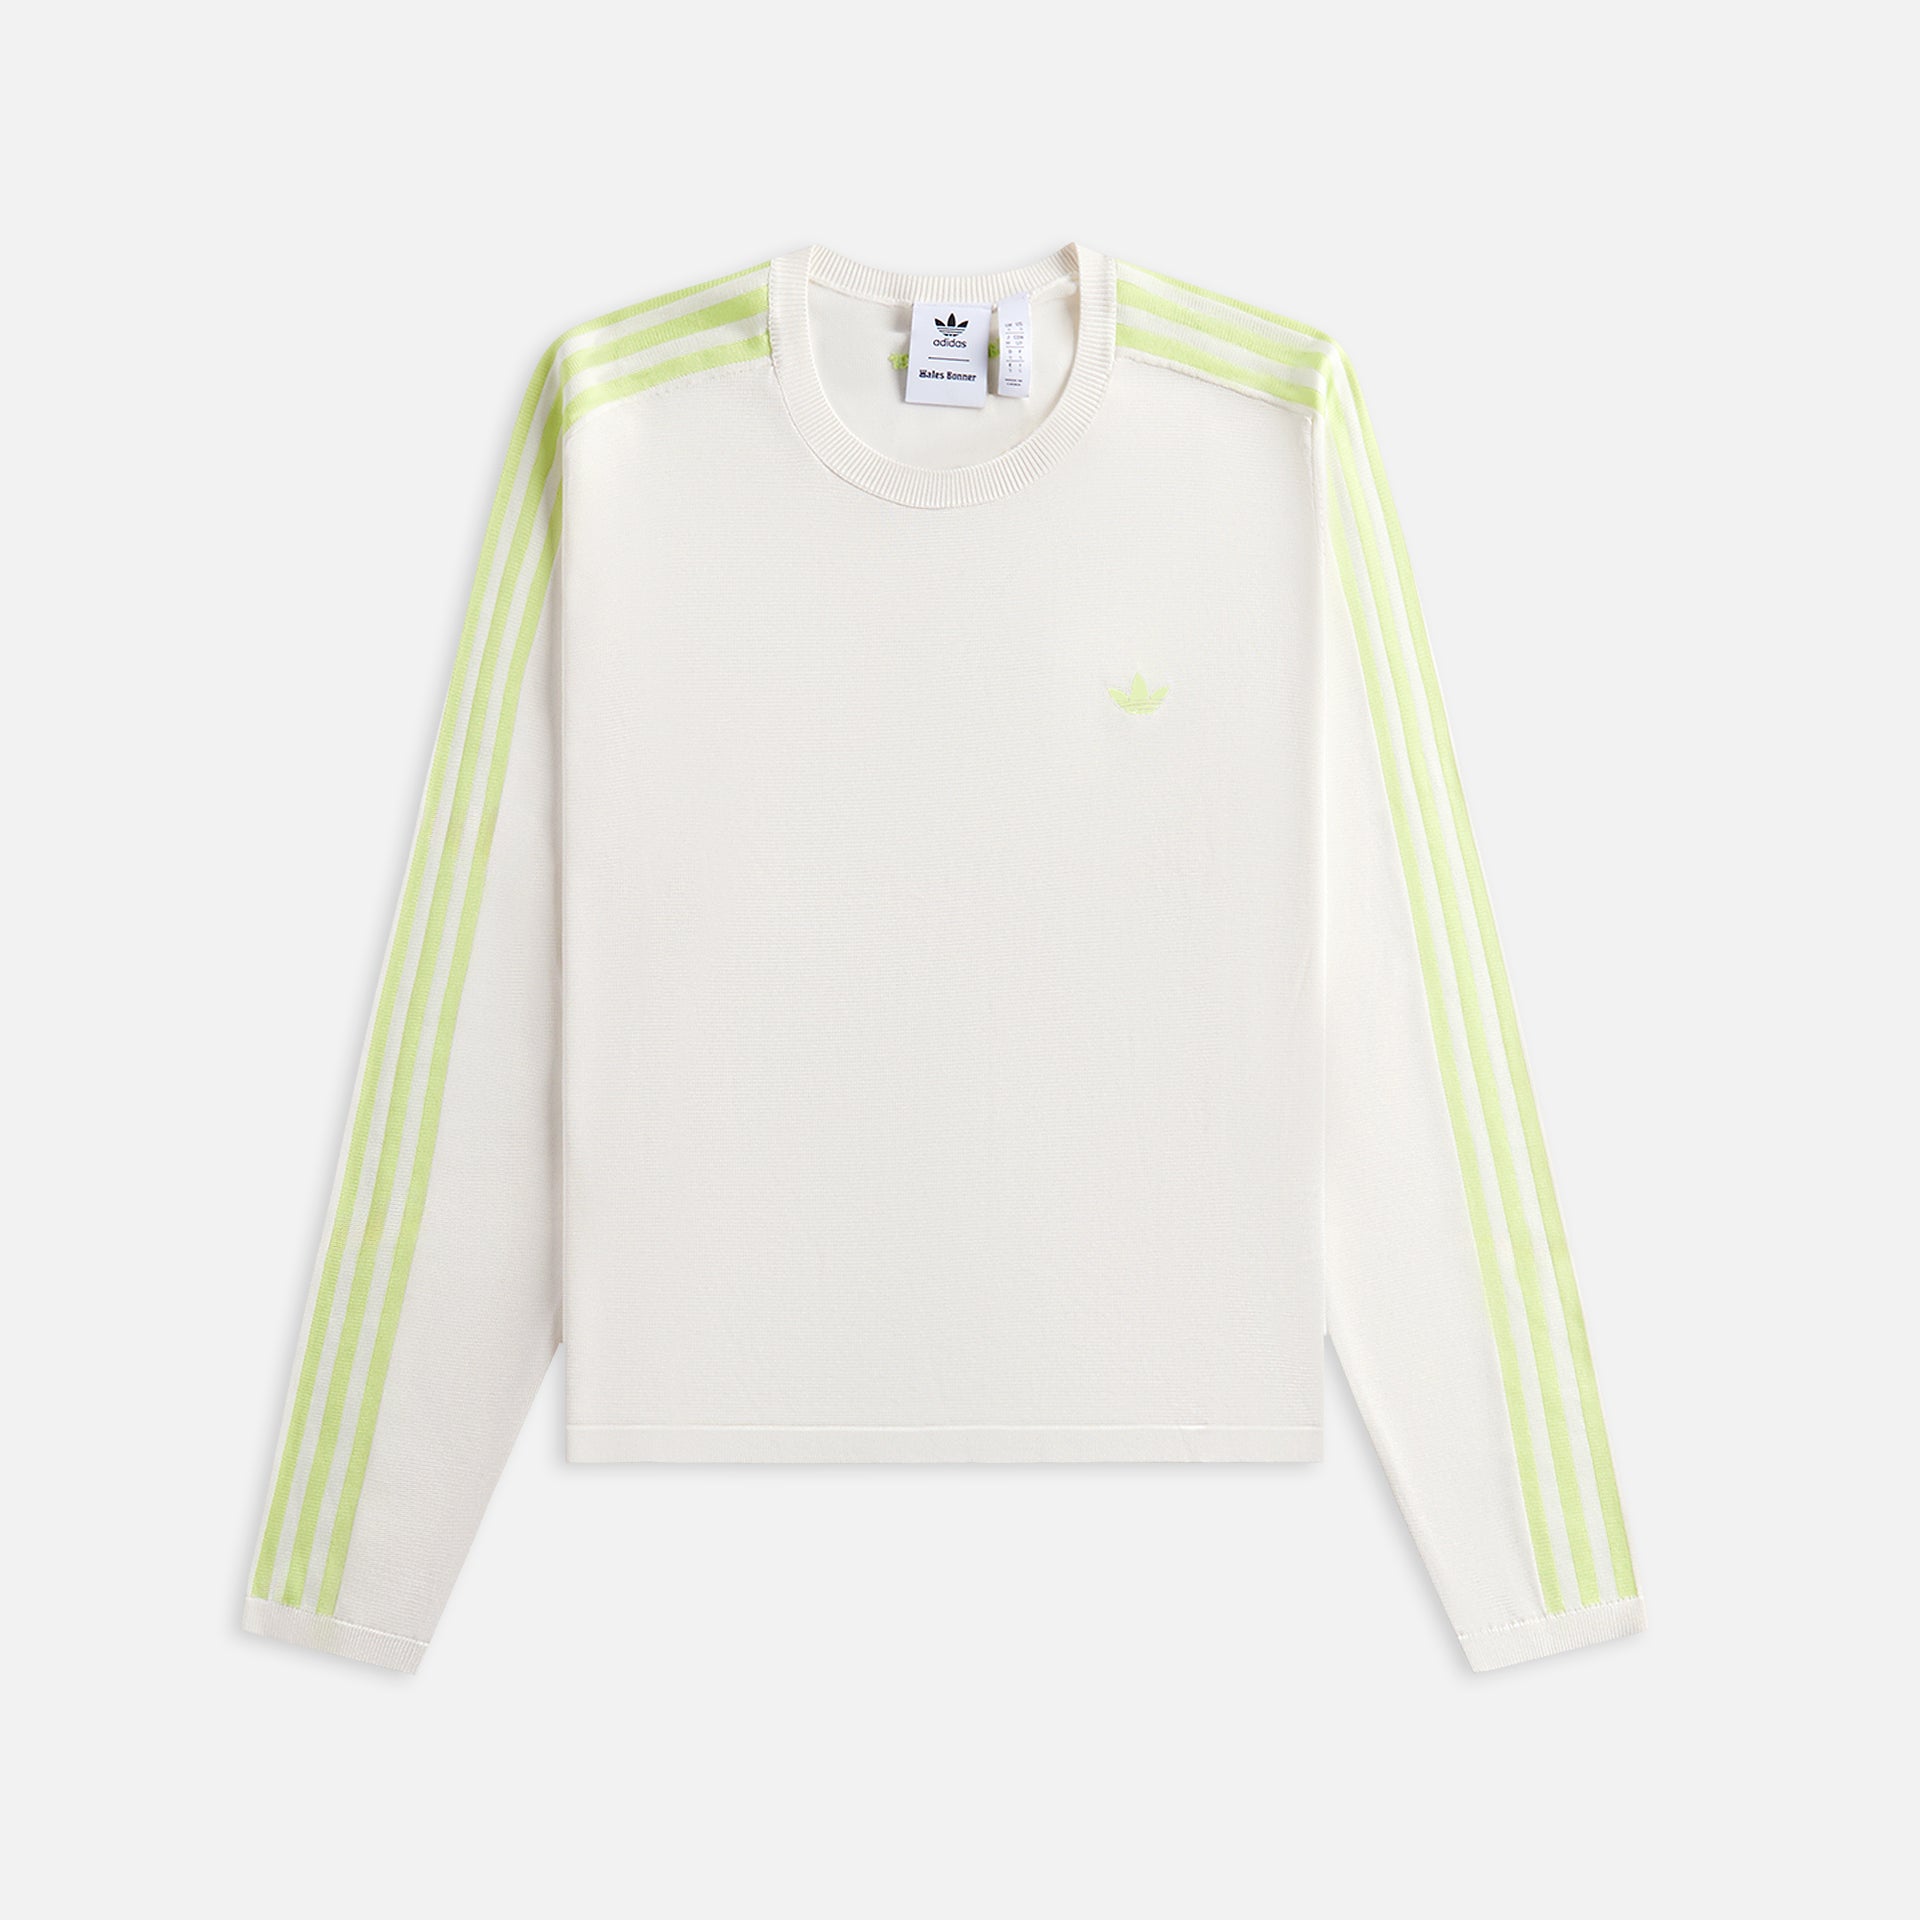 adidas Originals by Wales Bonner Long Sleeve Knit Tee - Ivory / Lime